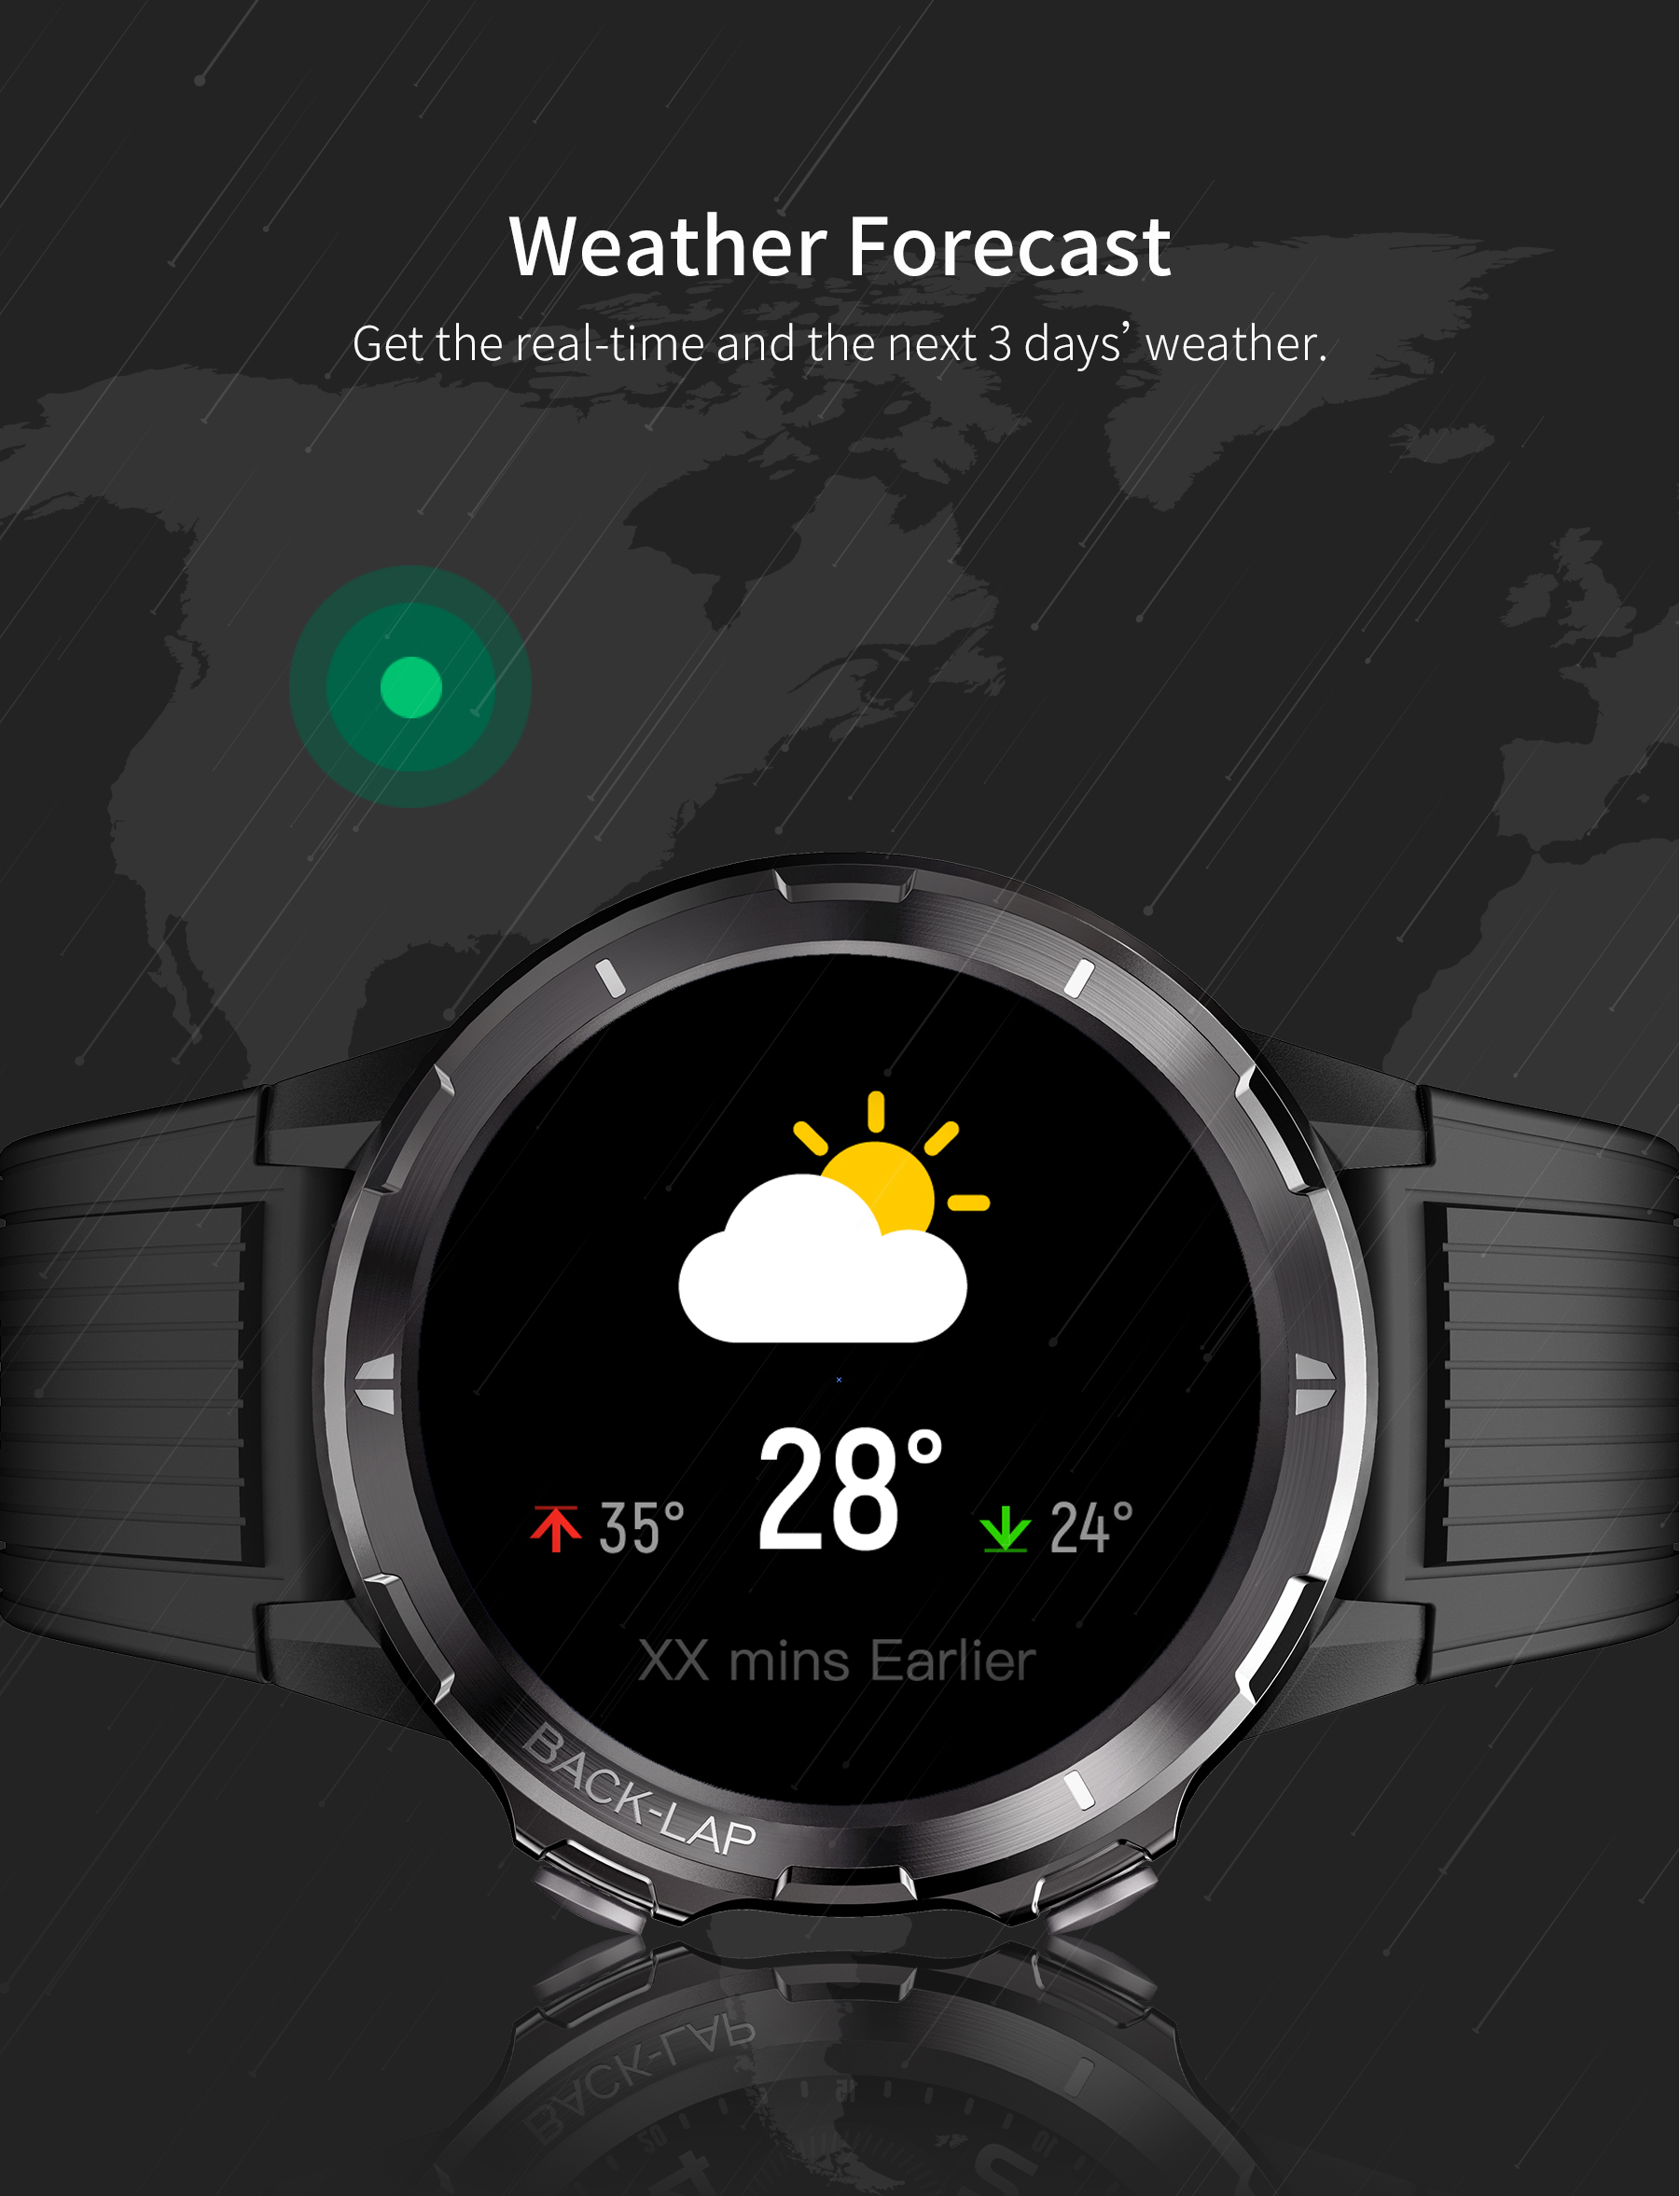 MAXED 350 Smartwatch Price in India - Buy MAXED 350 Smartwatch online at  Flipkart.com